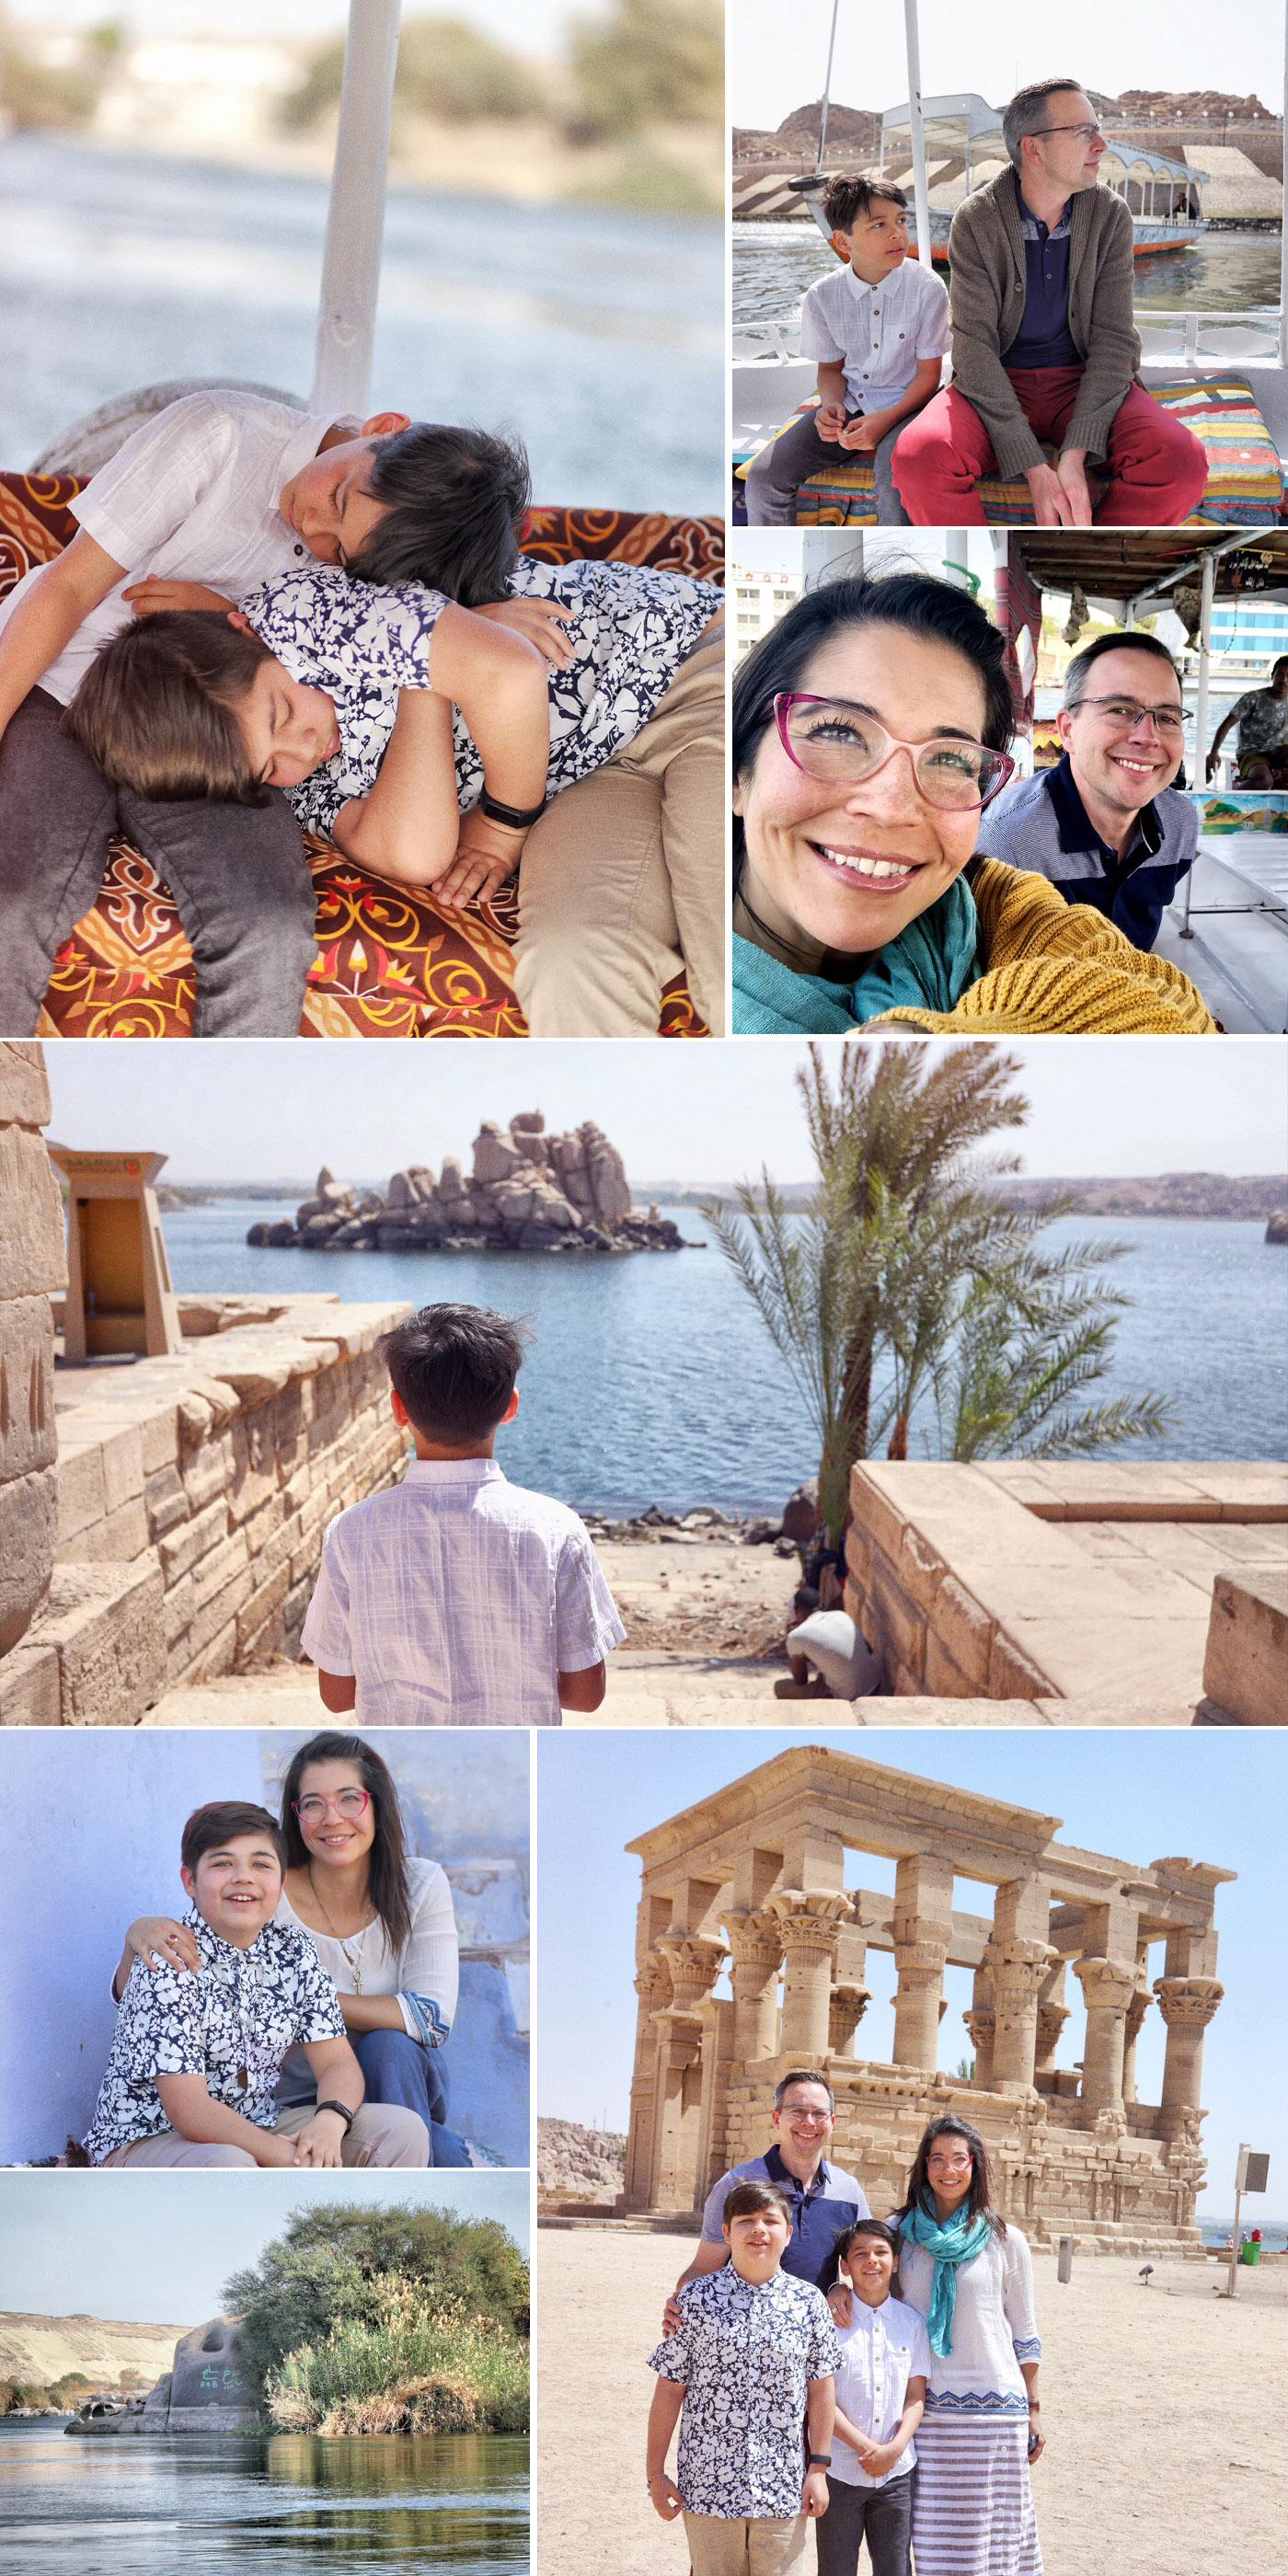 Motorboating on the Nile and visiting the Temple of Isis at Philae